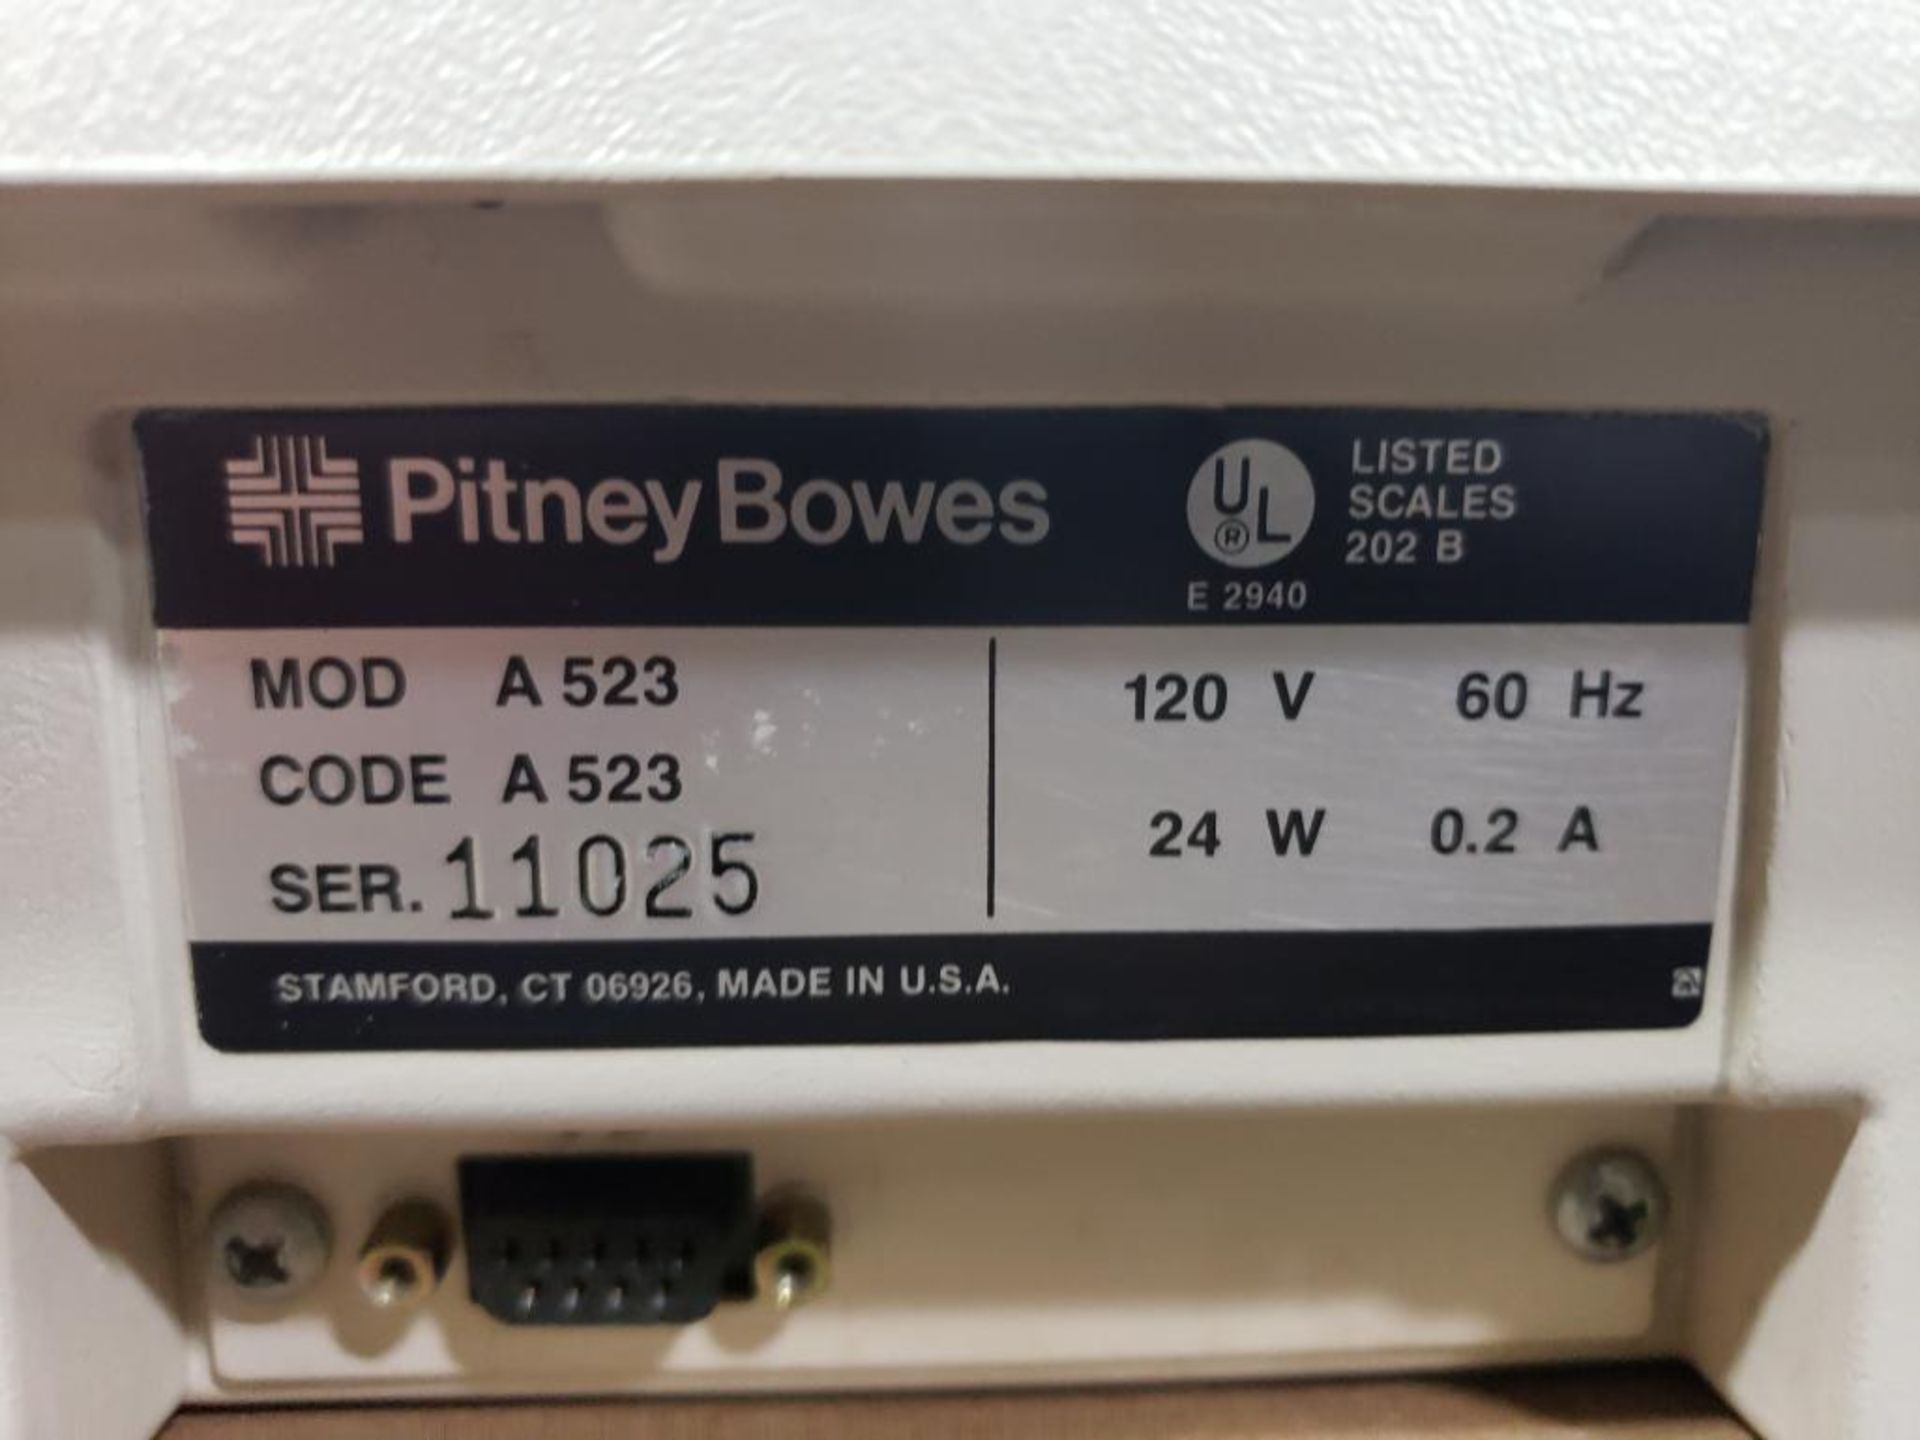 Pitney Bowes A523 digital scale. - Image 7 of 8